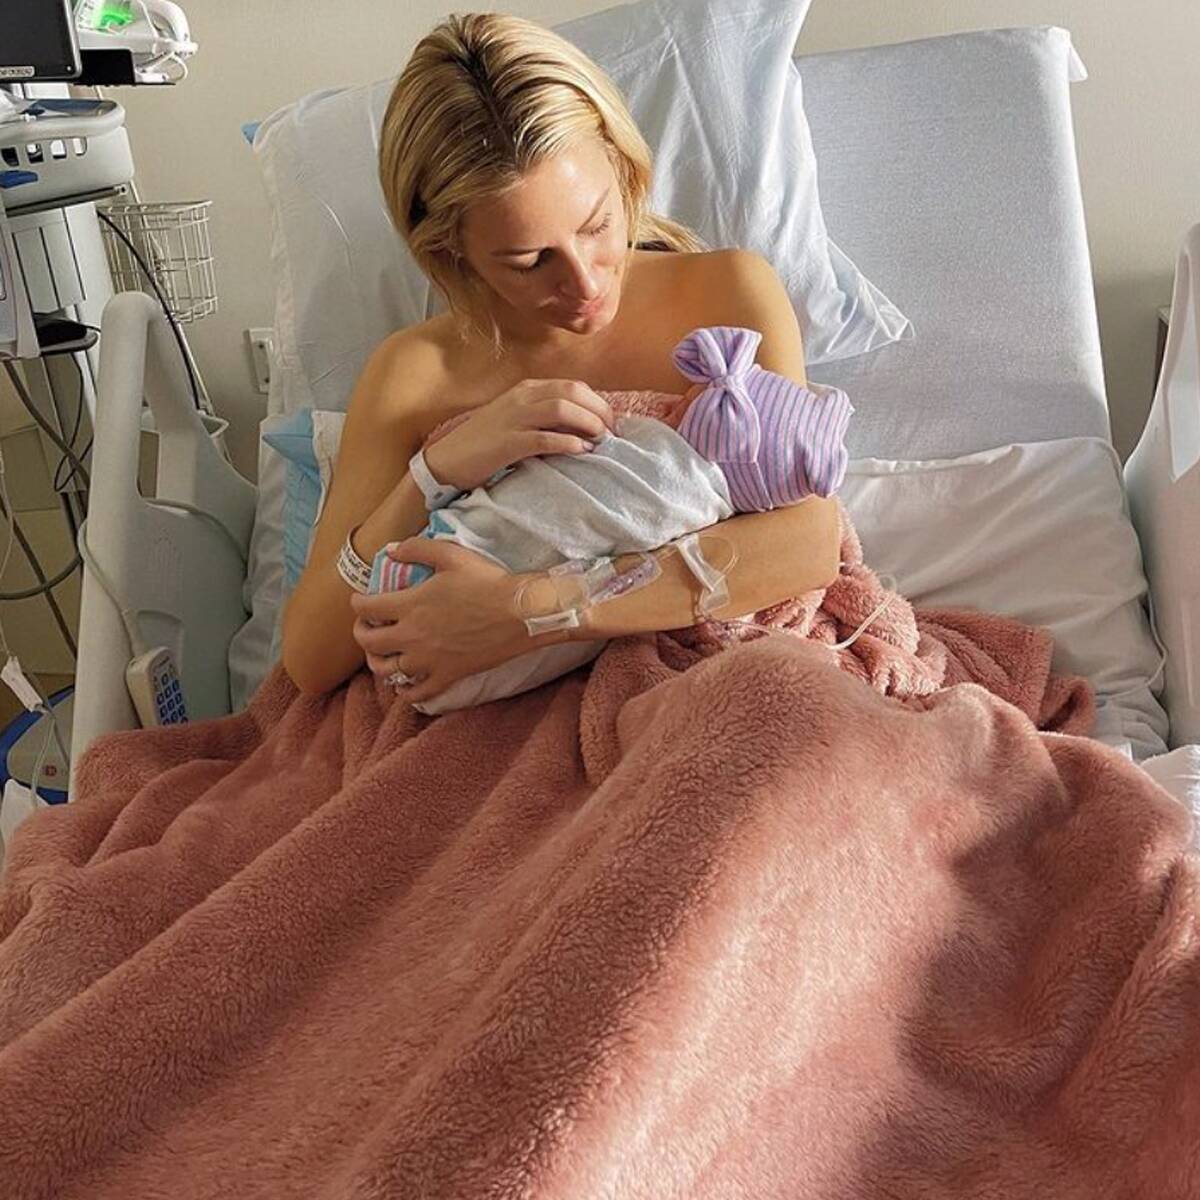 All the Photos From Morgan Stewart's First Days as a Mom